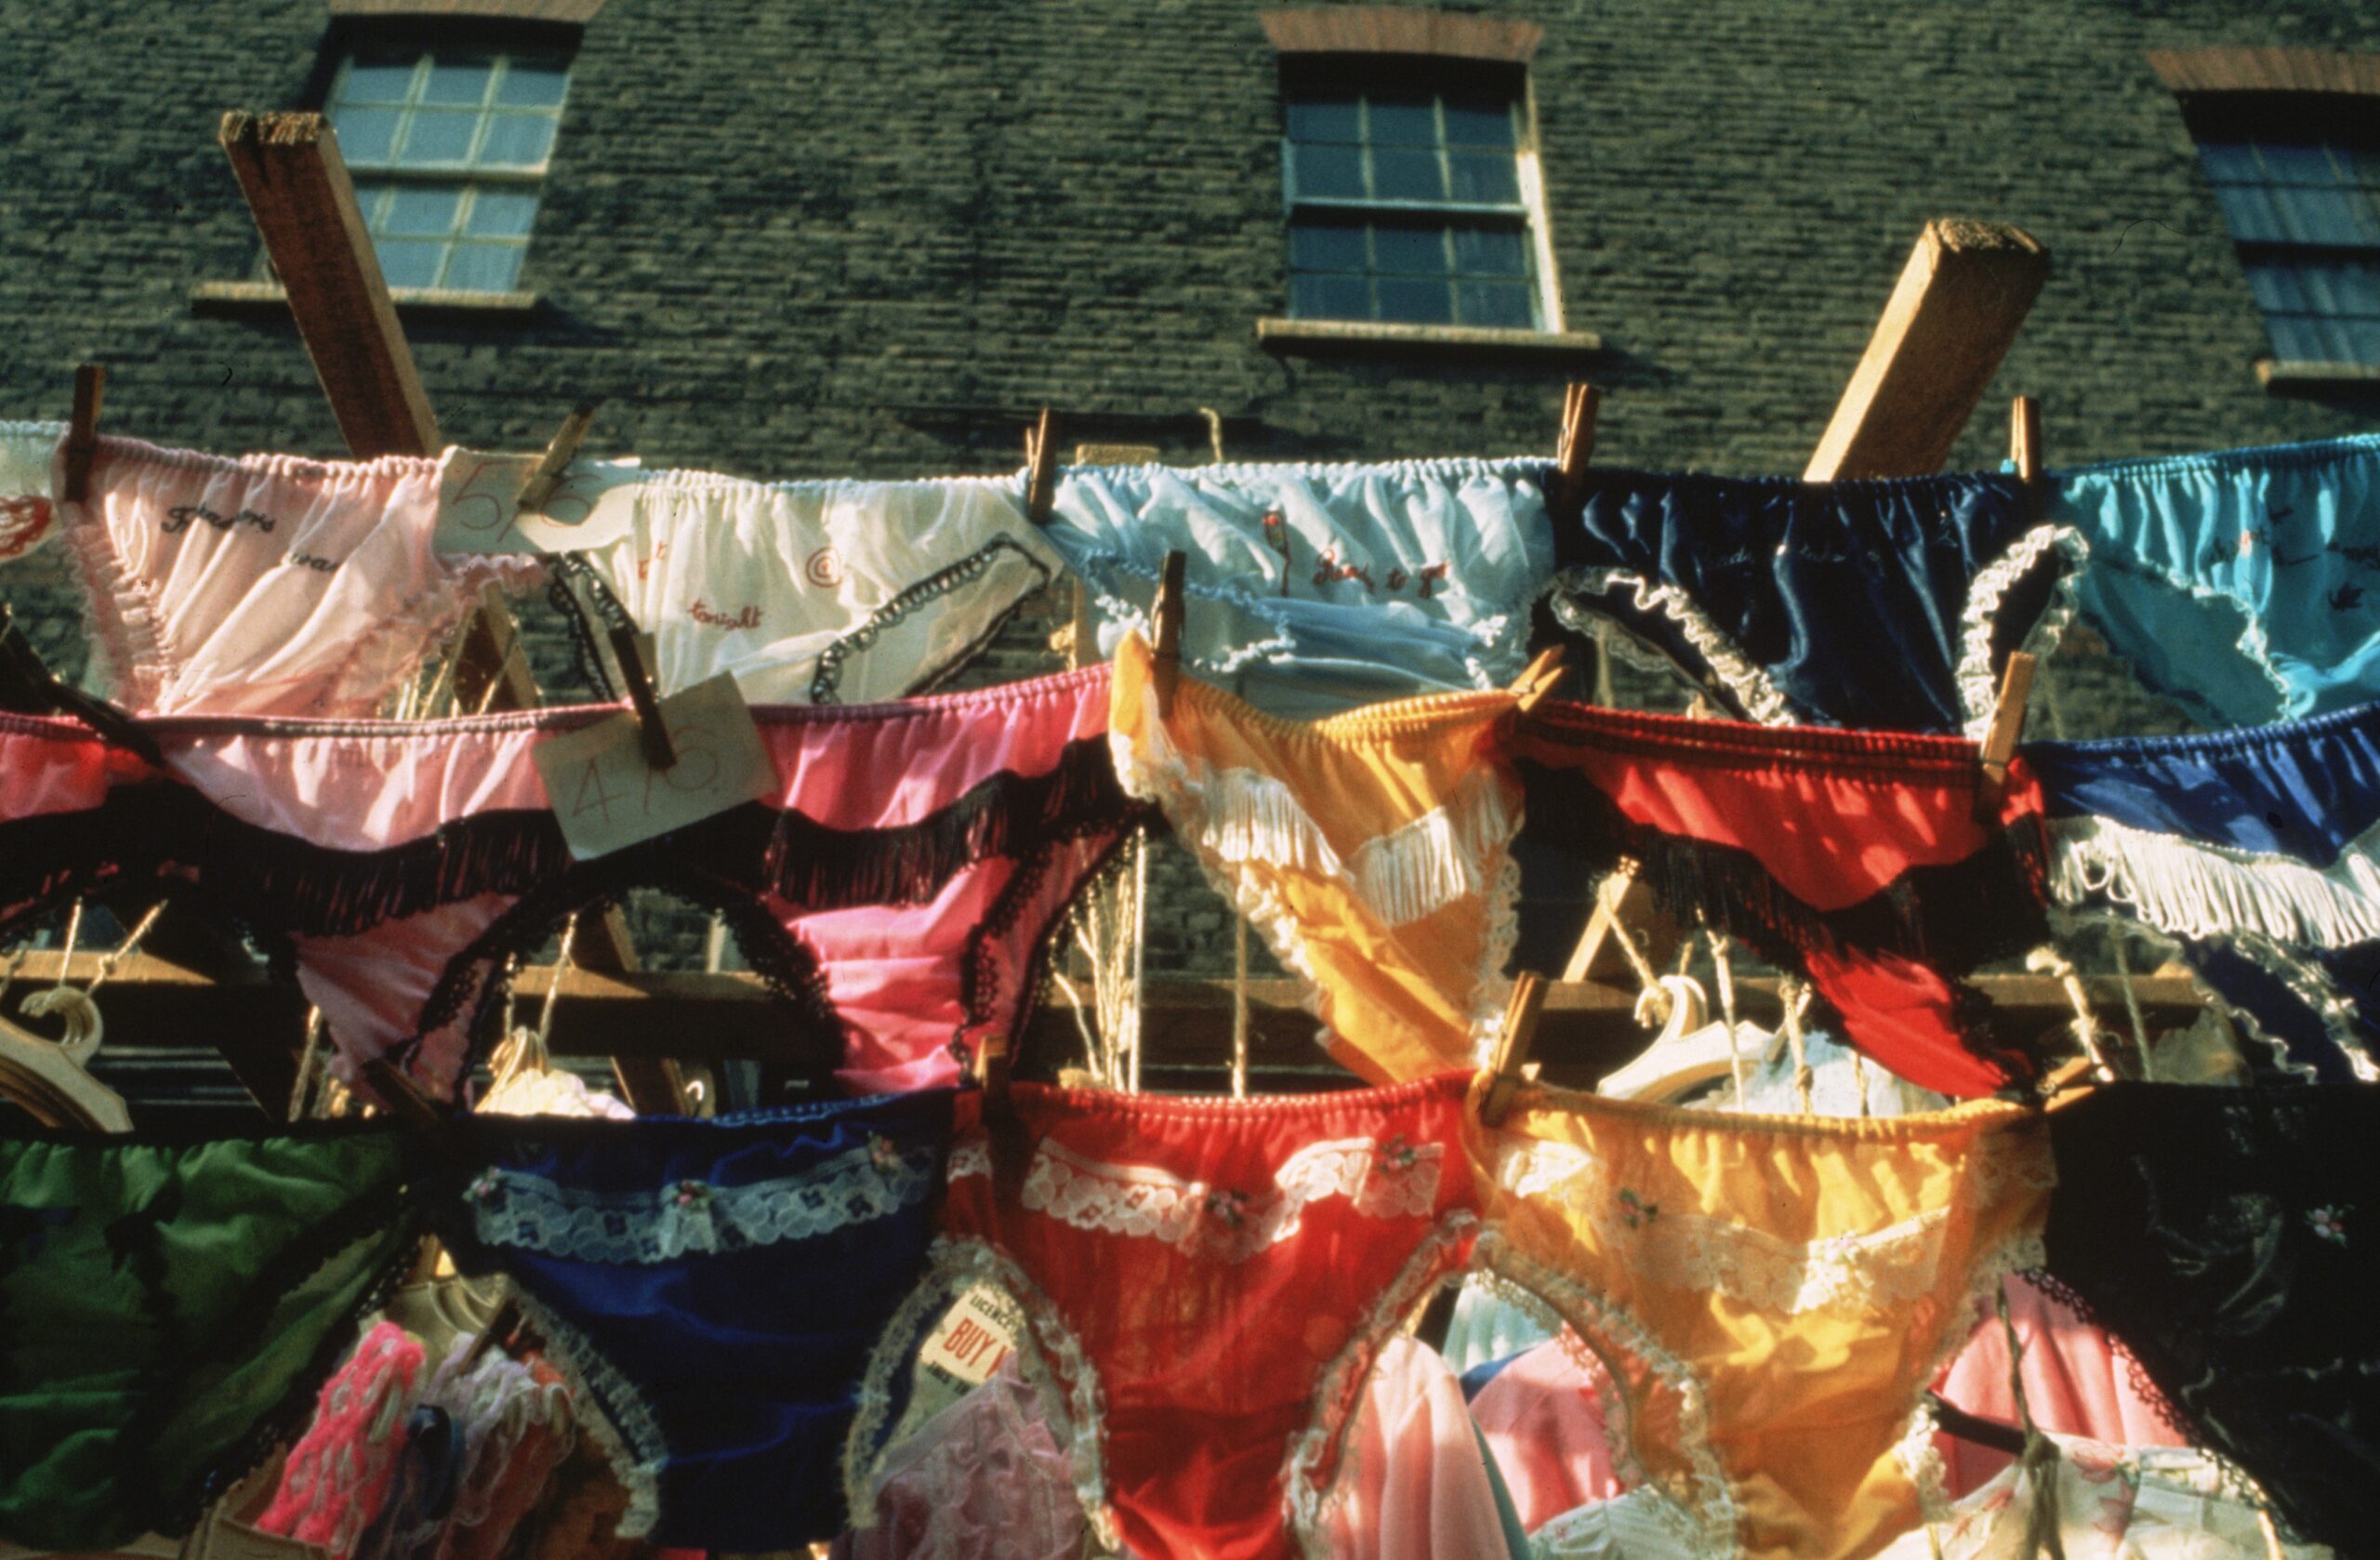 National Underwear Day: What scene do you think of first?